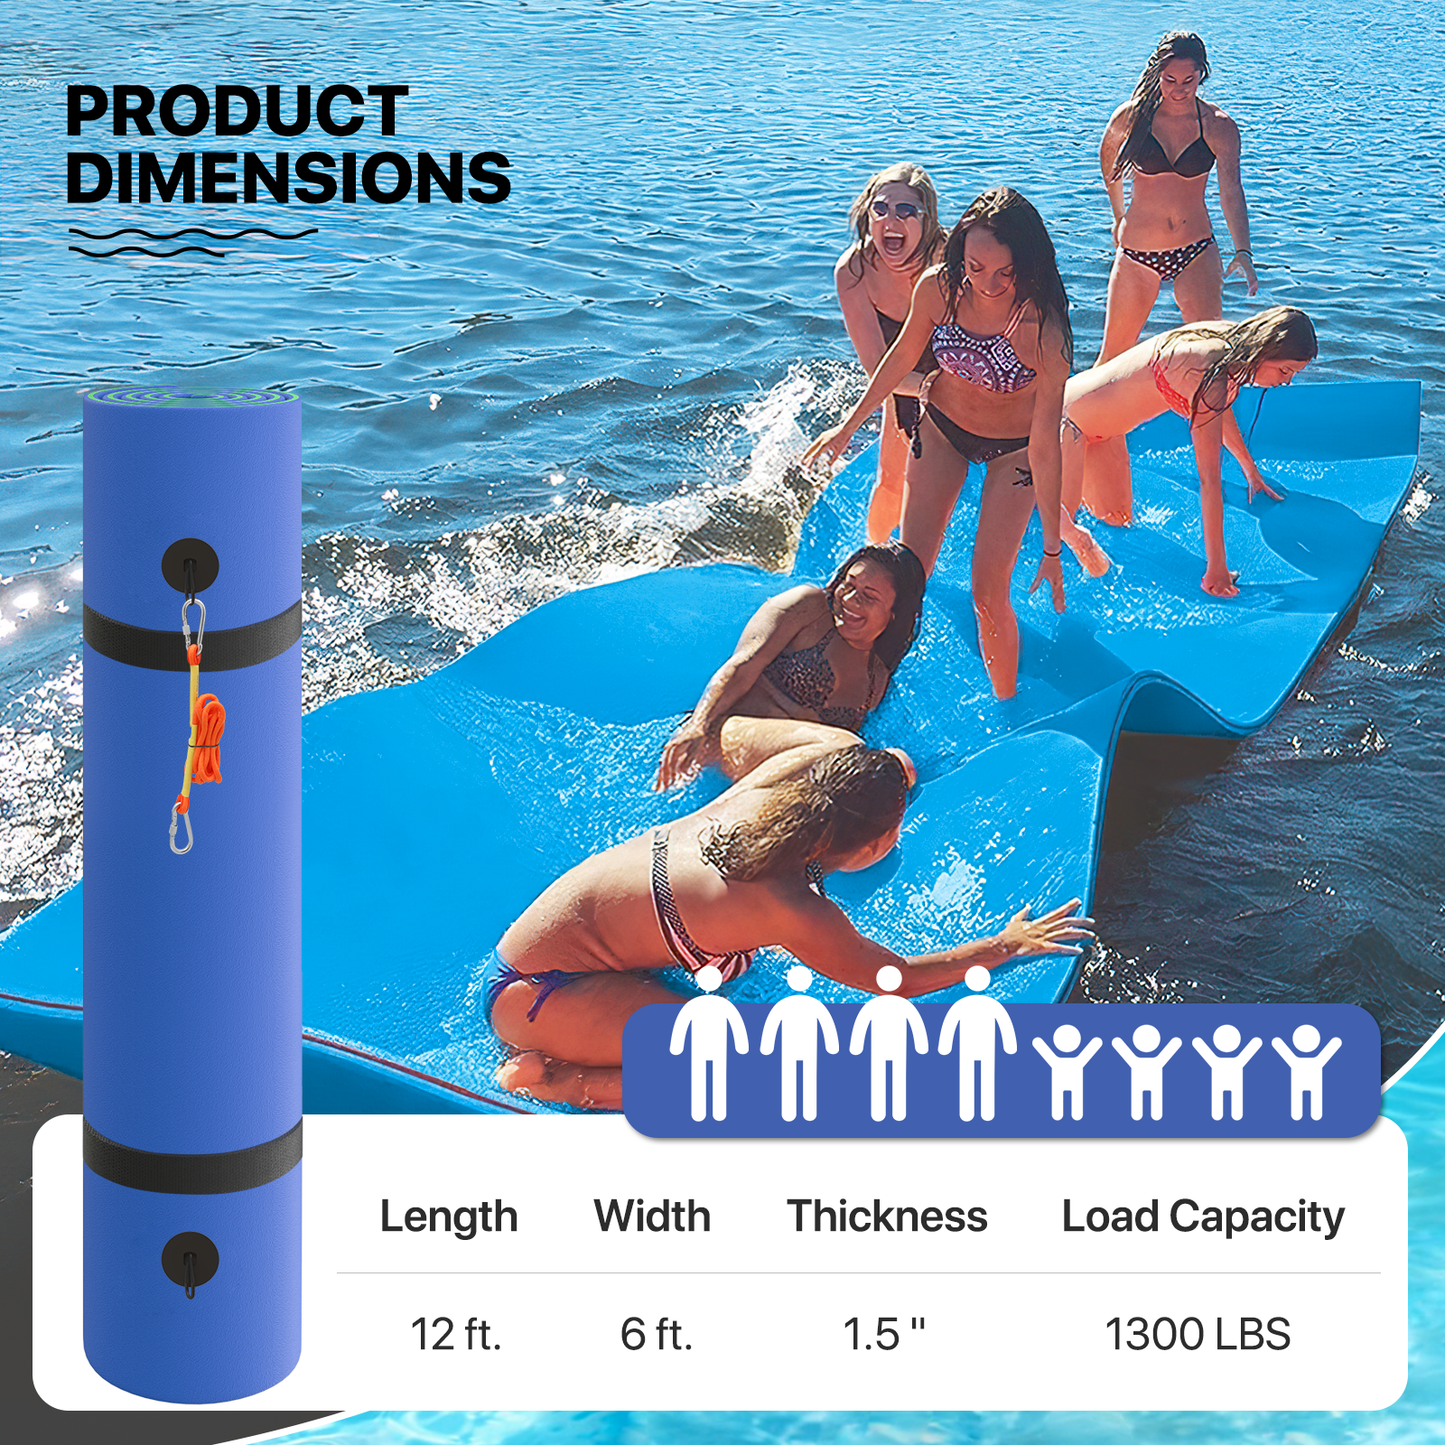 12 * 6 ft Water Floating Mat